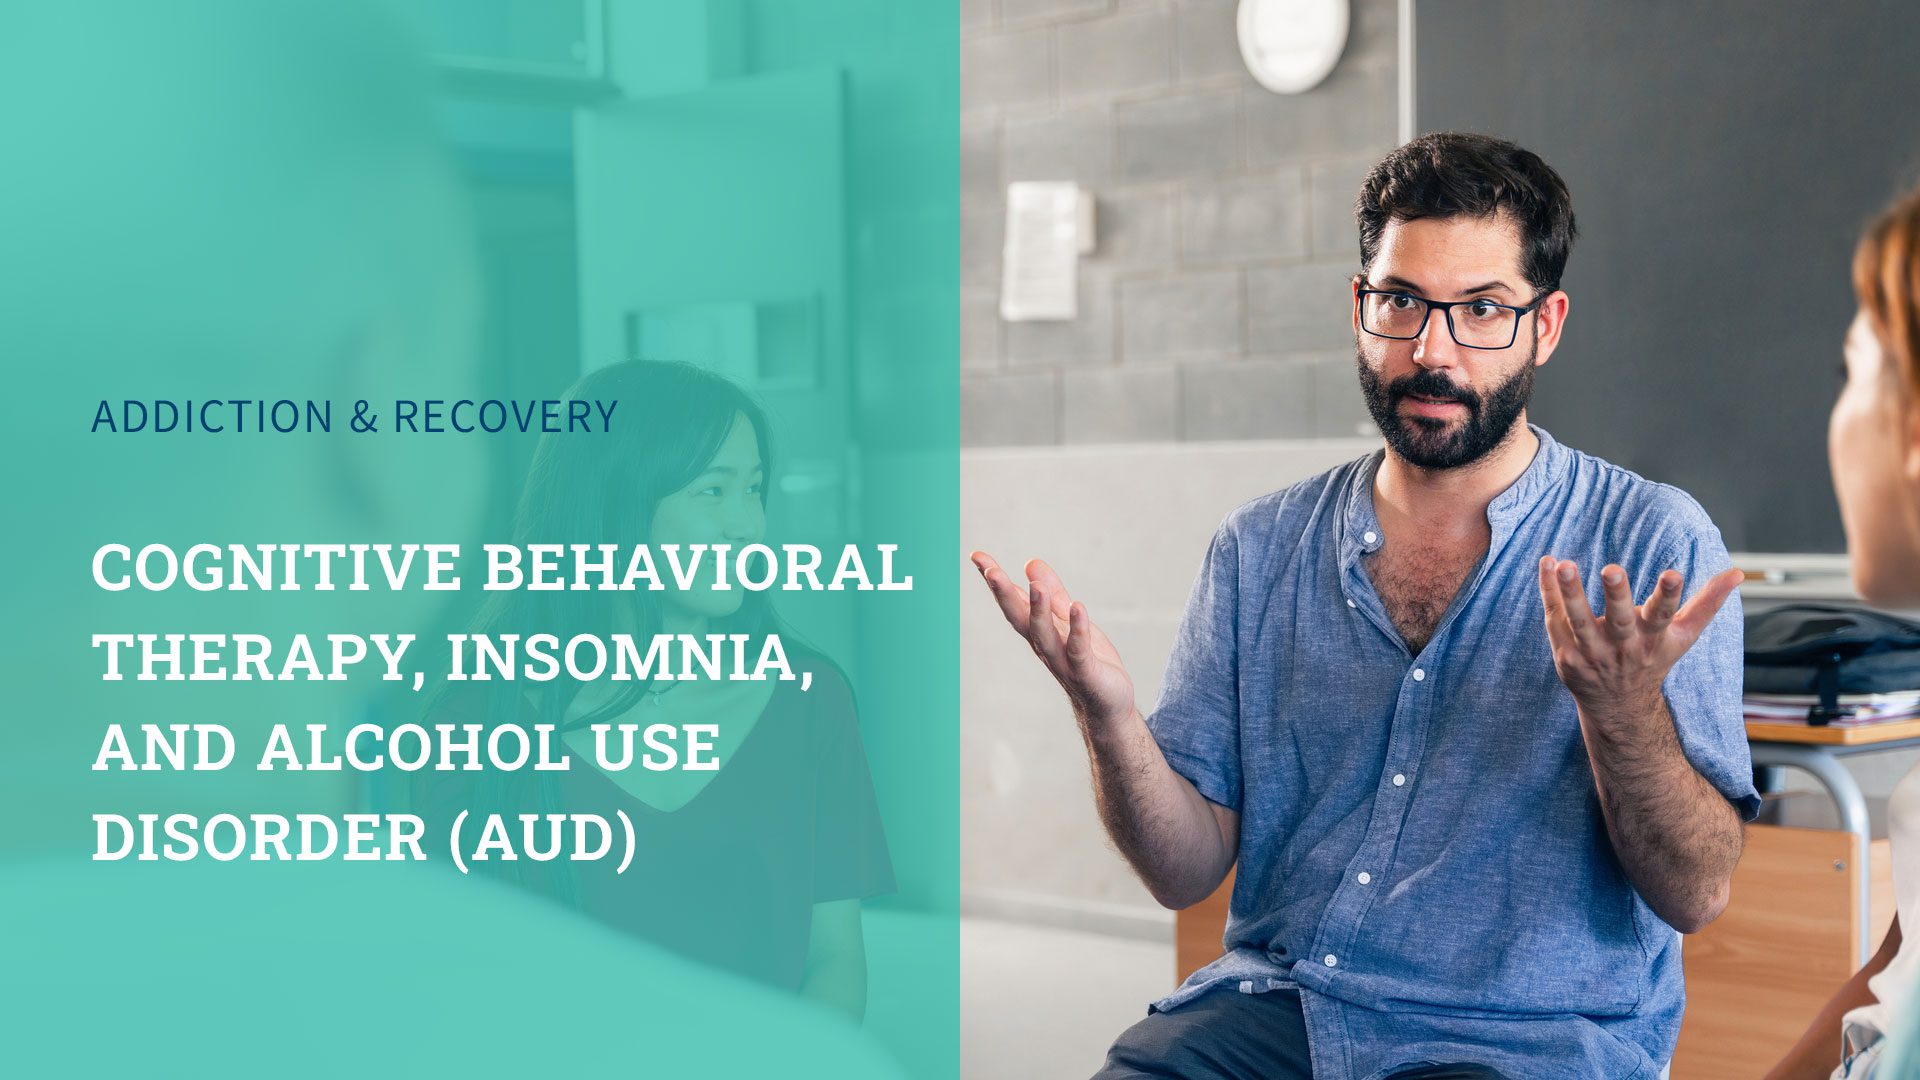 Cognitive Behavioral Therapy, Insomnia, and Alcohol Use Disorder (AUD)